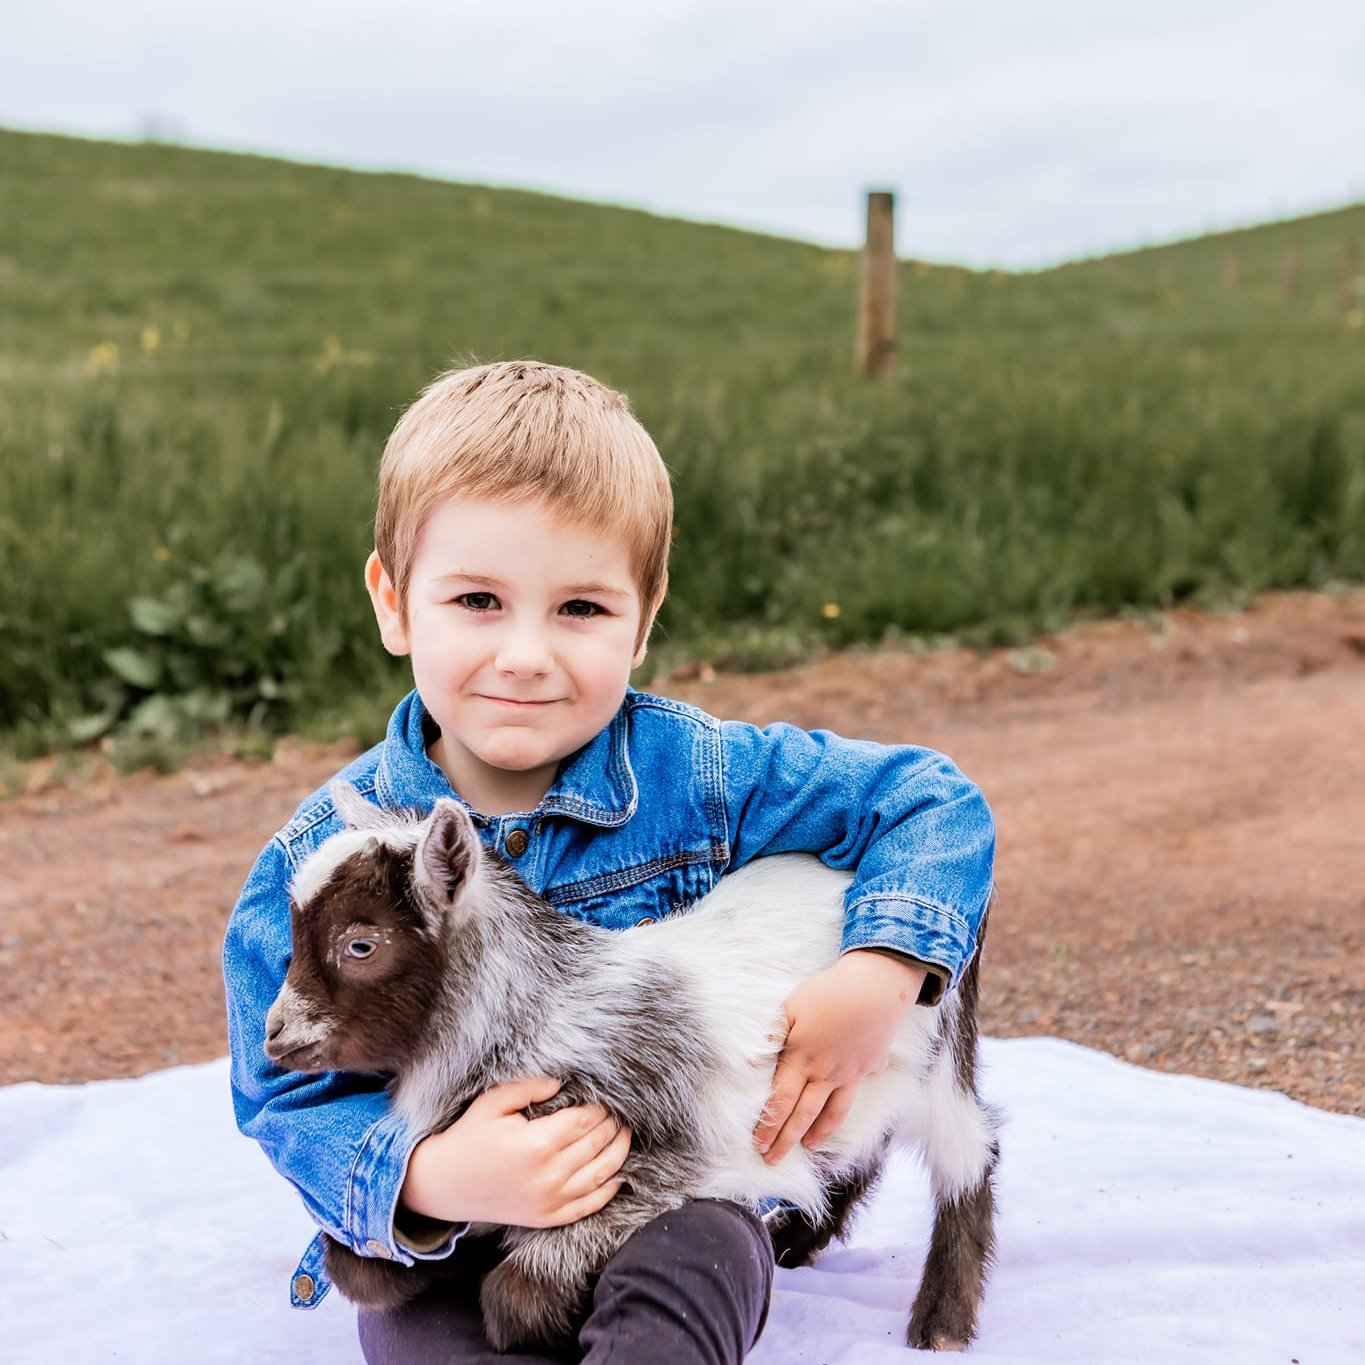 What do you call a baby goat? 

A kid 😂

Thank you Honey Brook Farm for giving us this opportunity to host these mini sessions!

Www.michalareberphotography.com